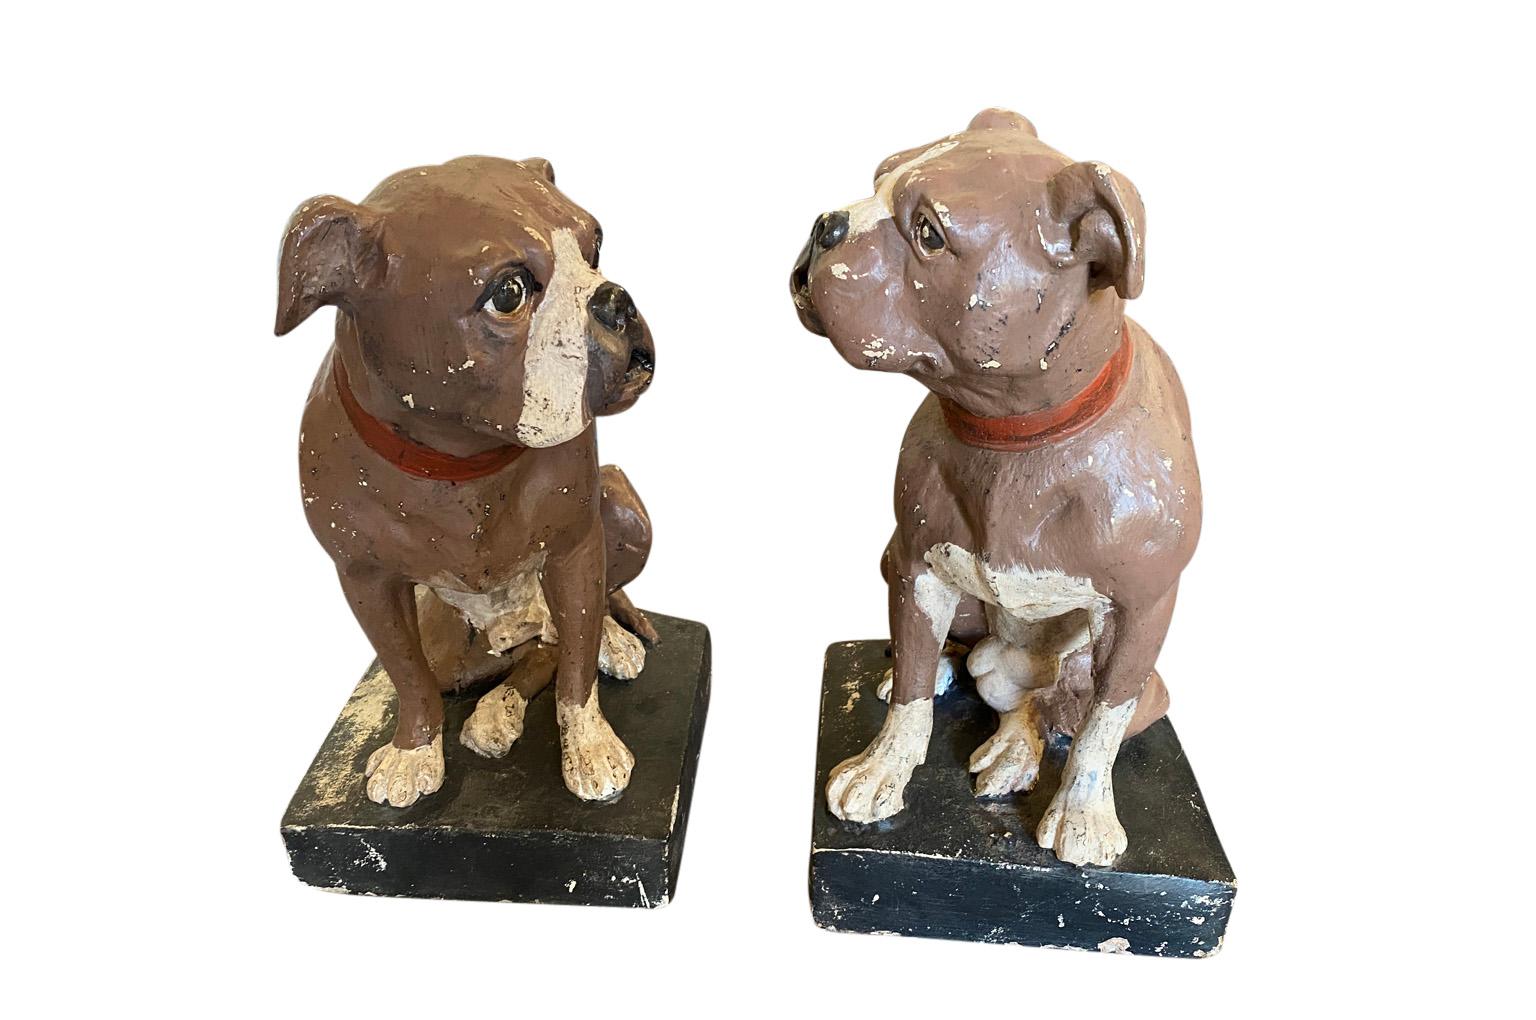 A delightful pair of early 20th century Bulldogs from England in painted concrete. Charming!.